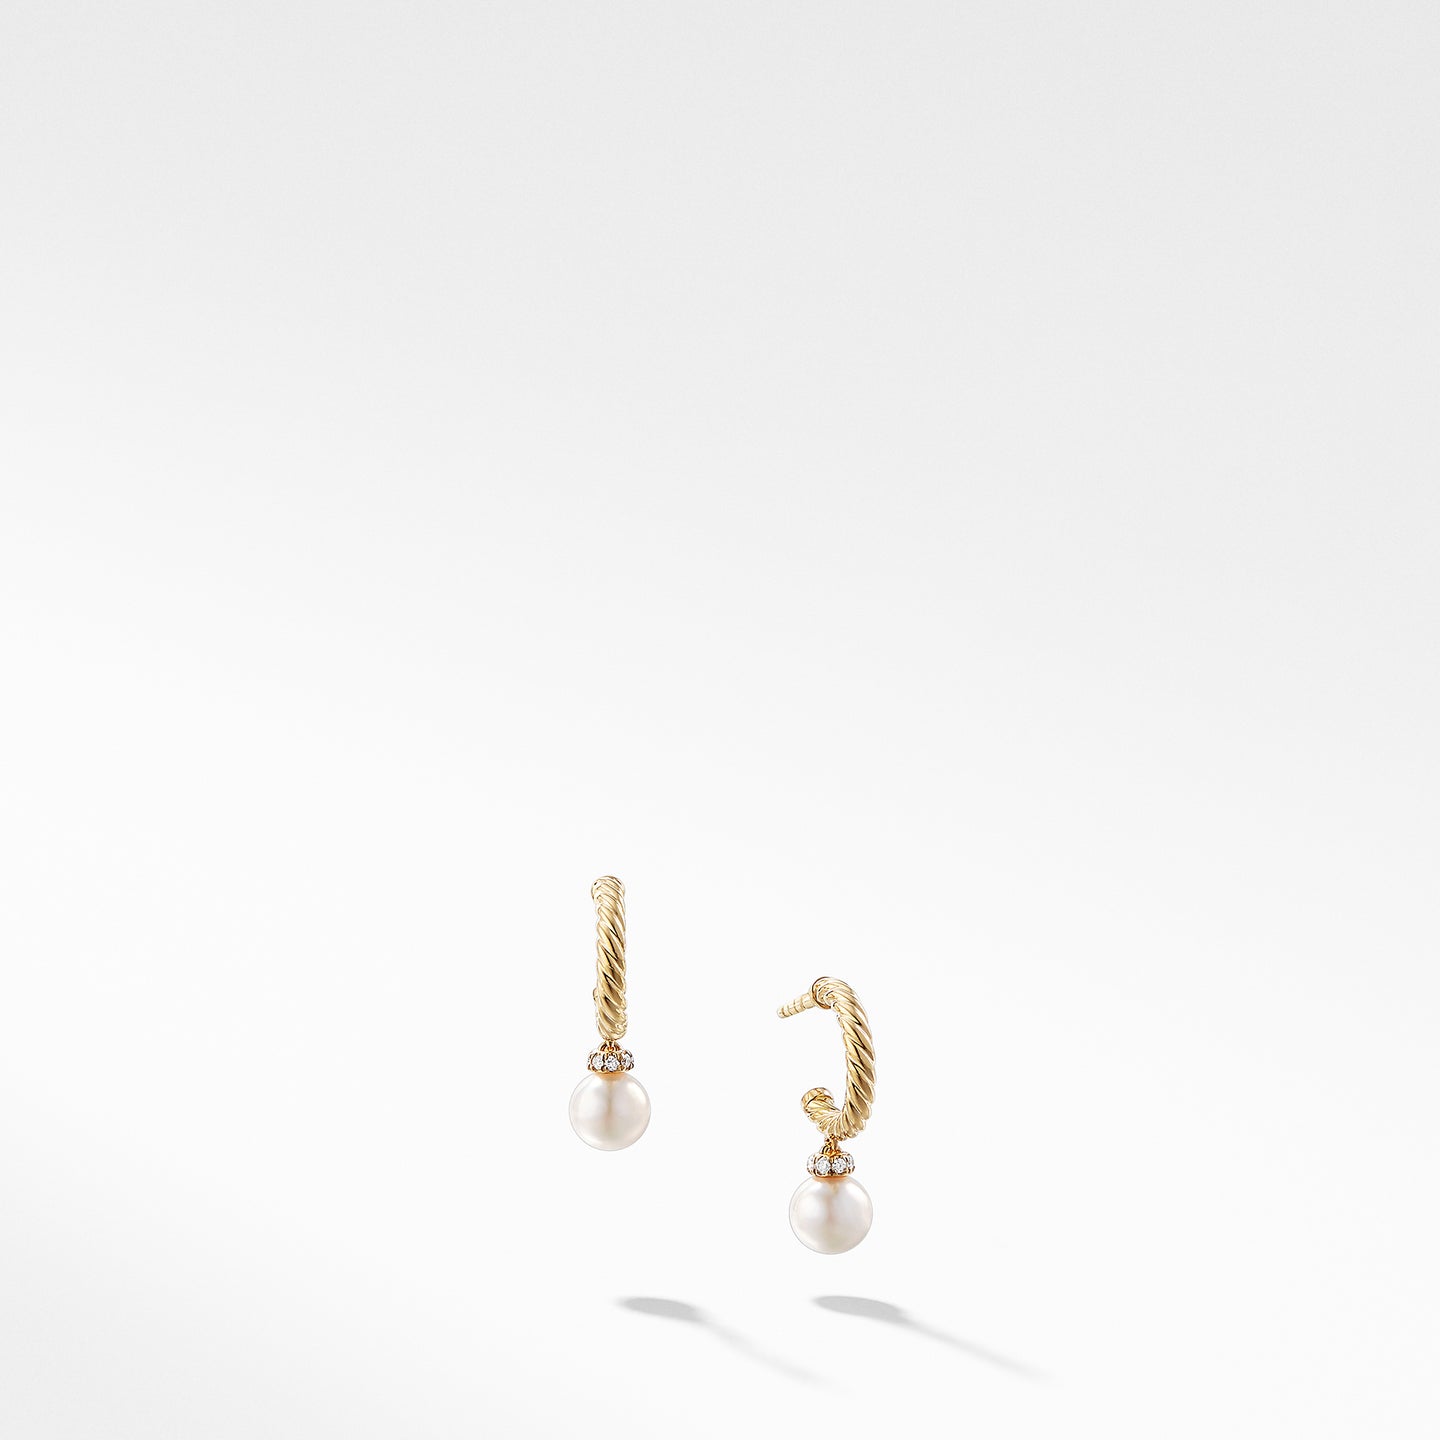 Solari Hoop Earrings with Cultured Pearl and Diamonds in 18K Gold